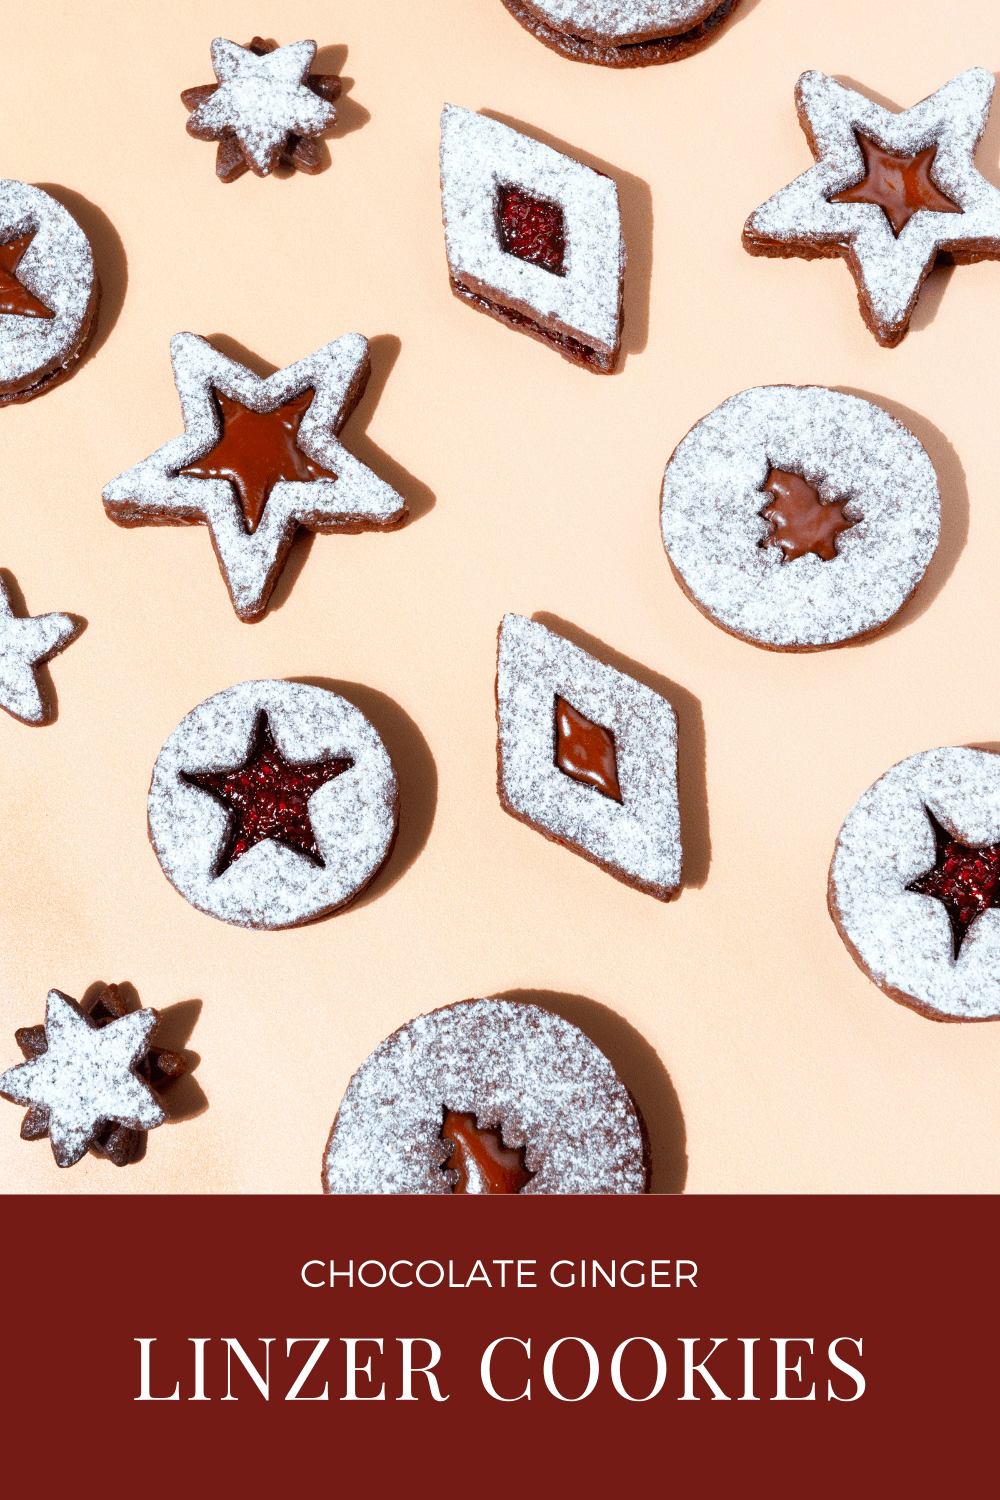 Chocolate Ginger Linzer Cookies Recipes